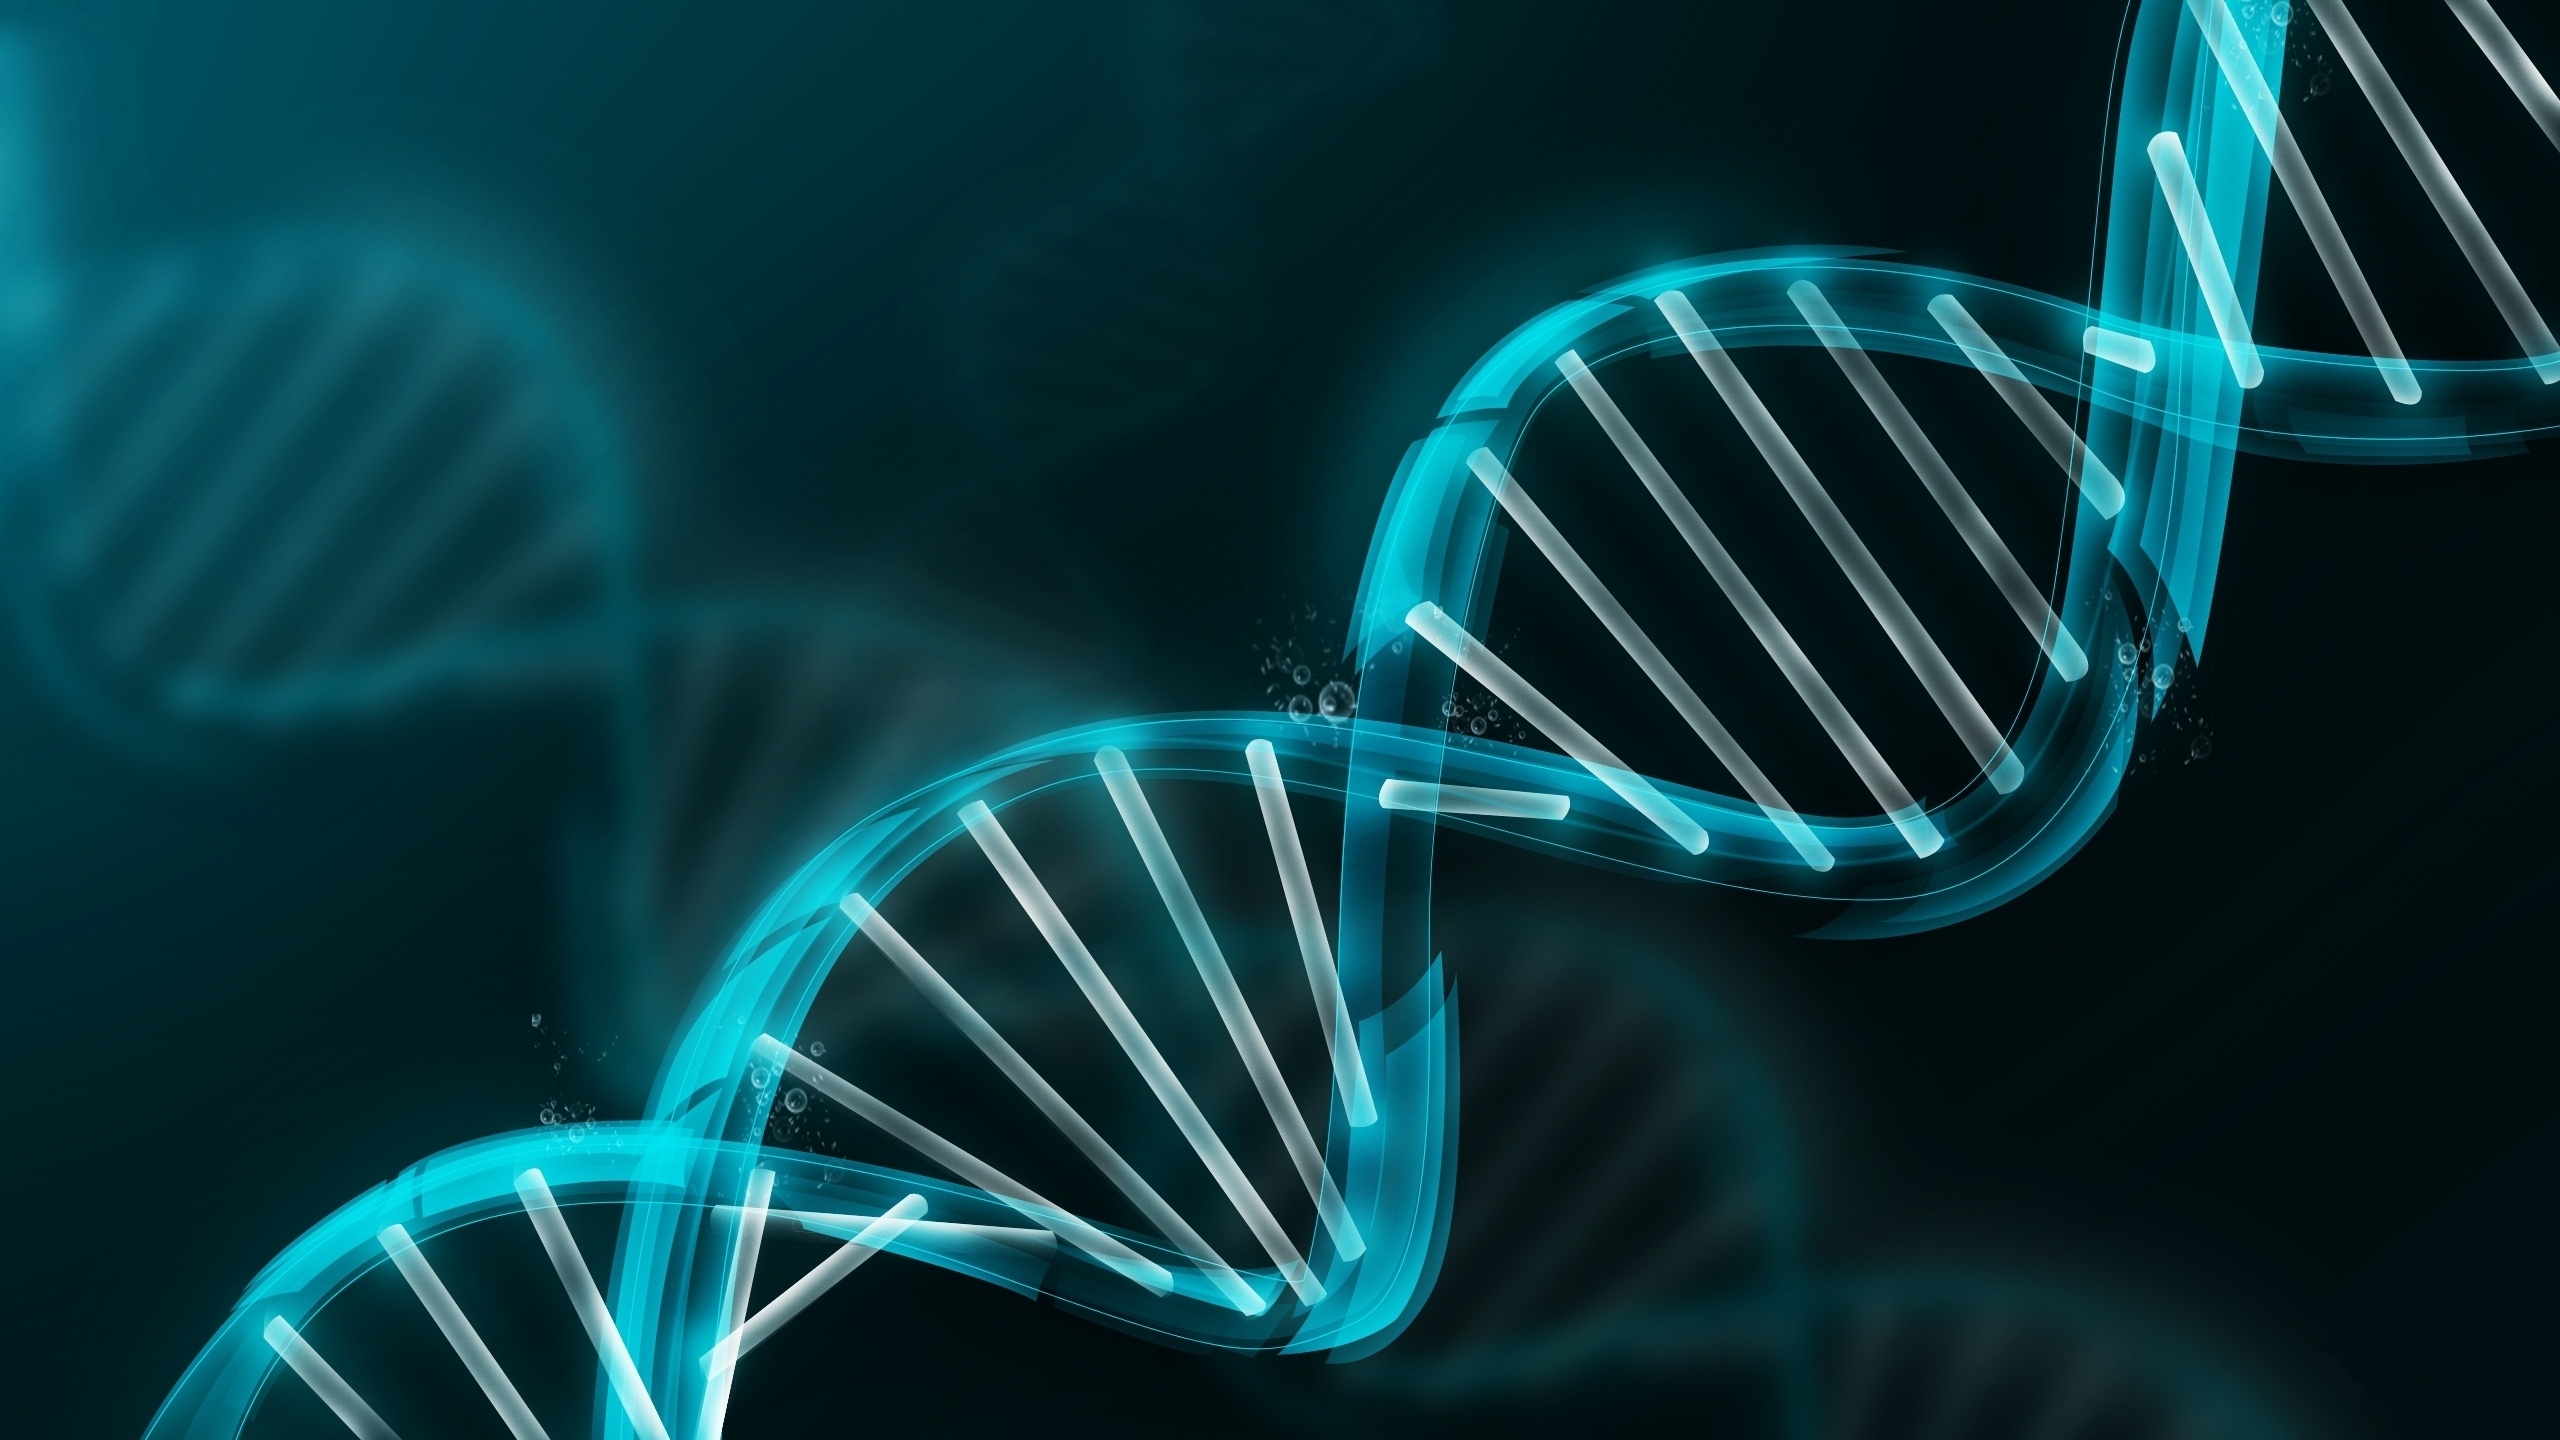 dna wallpapers, top hd dna wallpapers, #ng high resolution